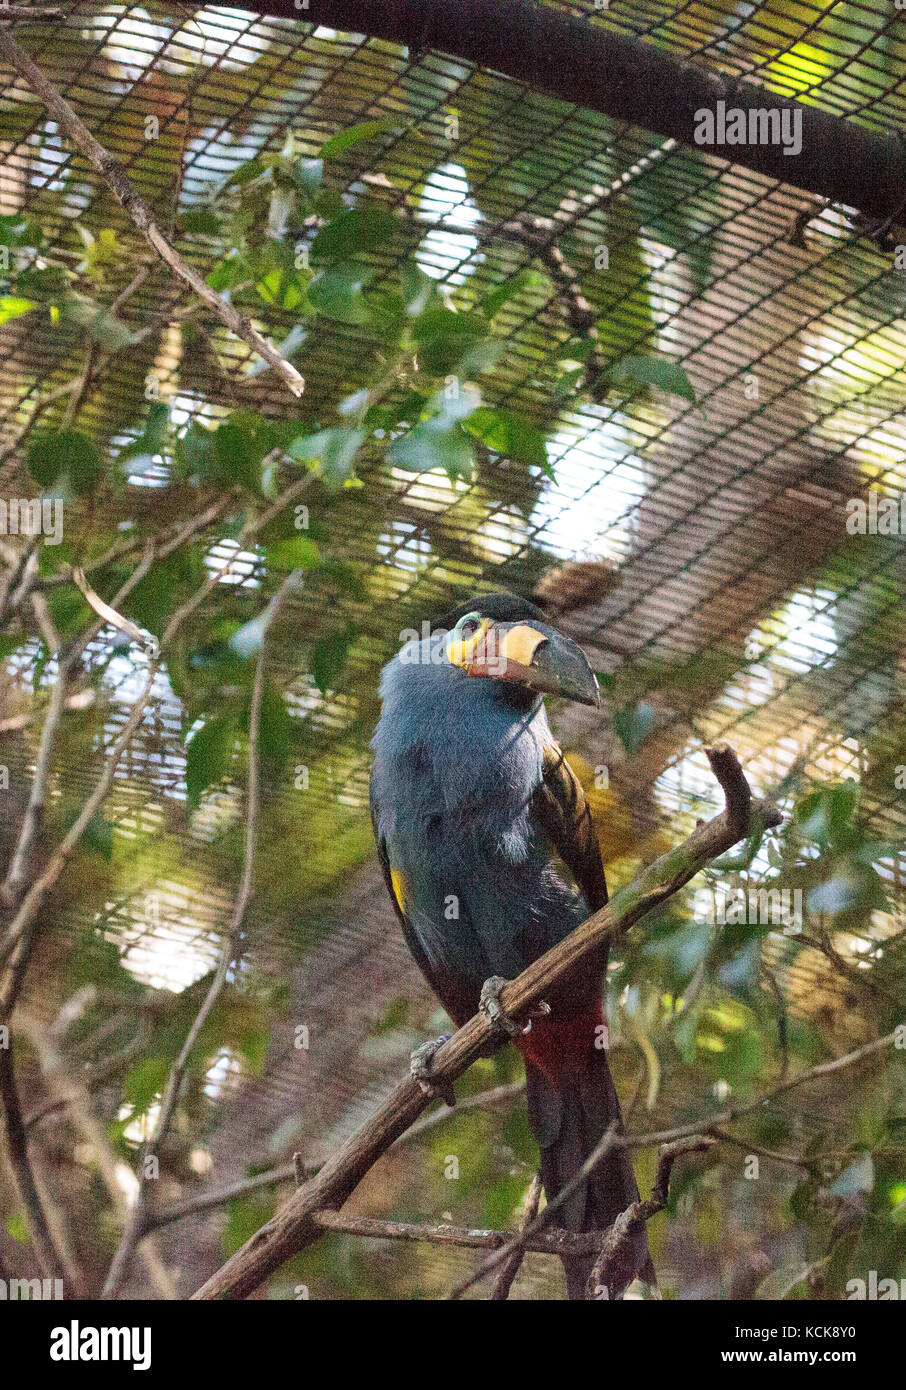 Plate-billed mountain toucan Andigena laminirostris behind the walls of a cage Stock Photo